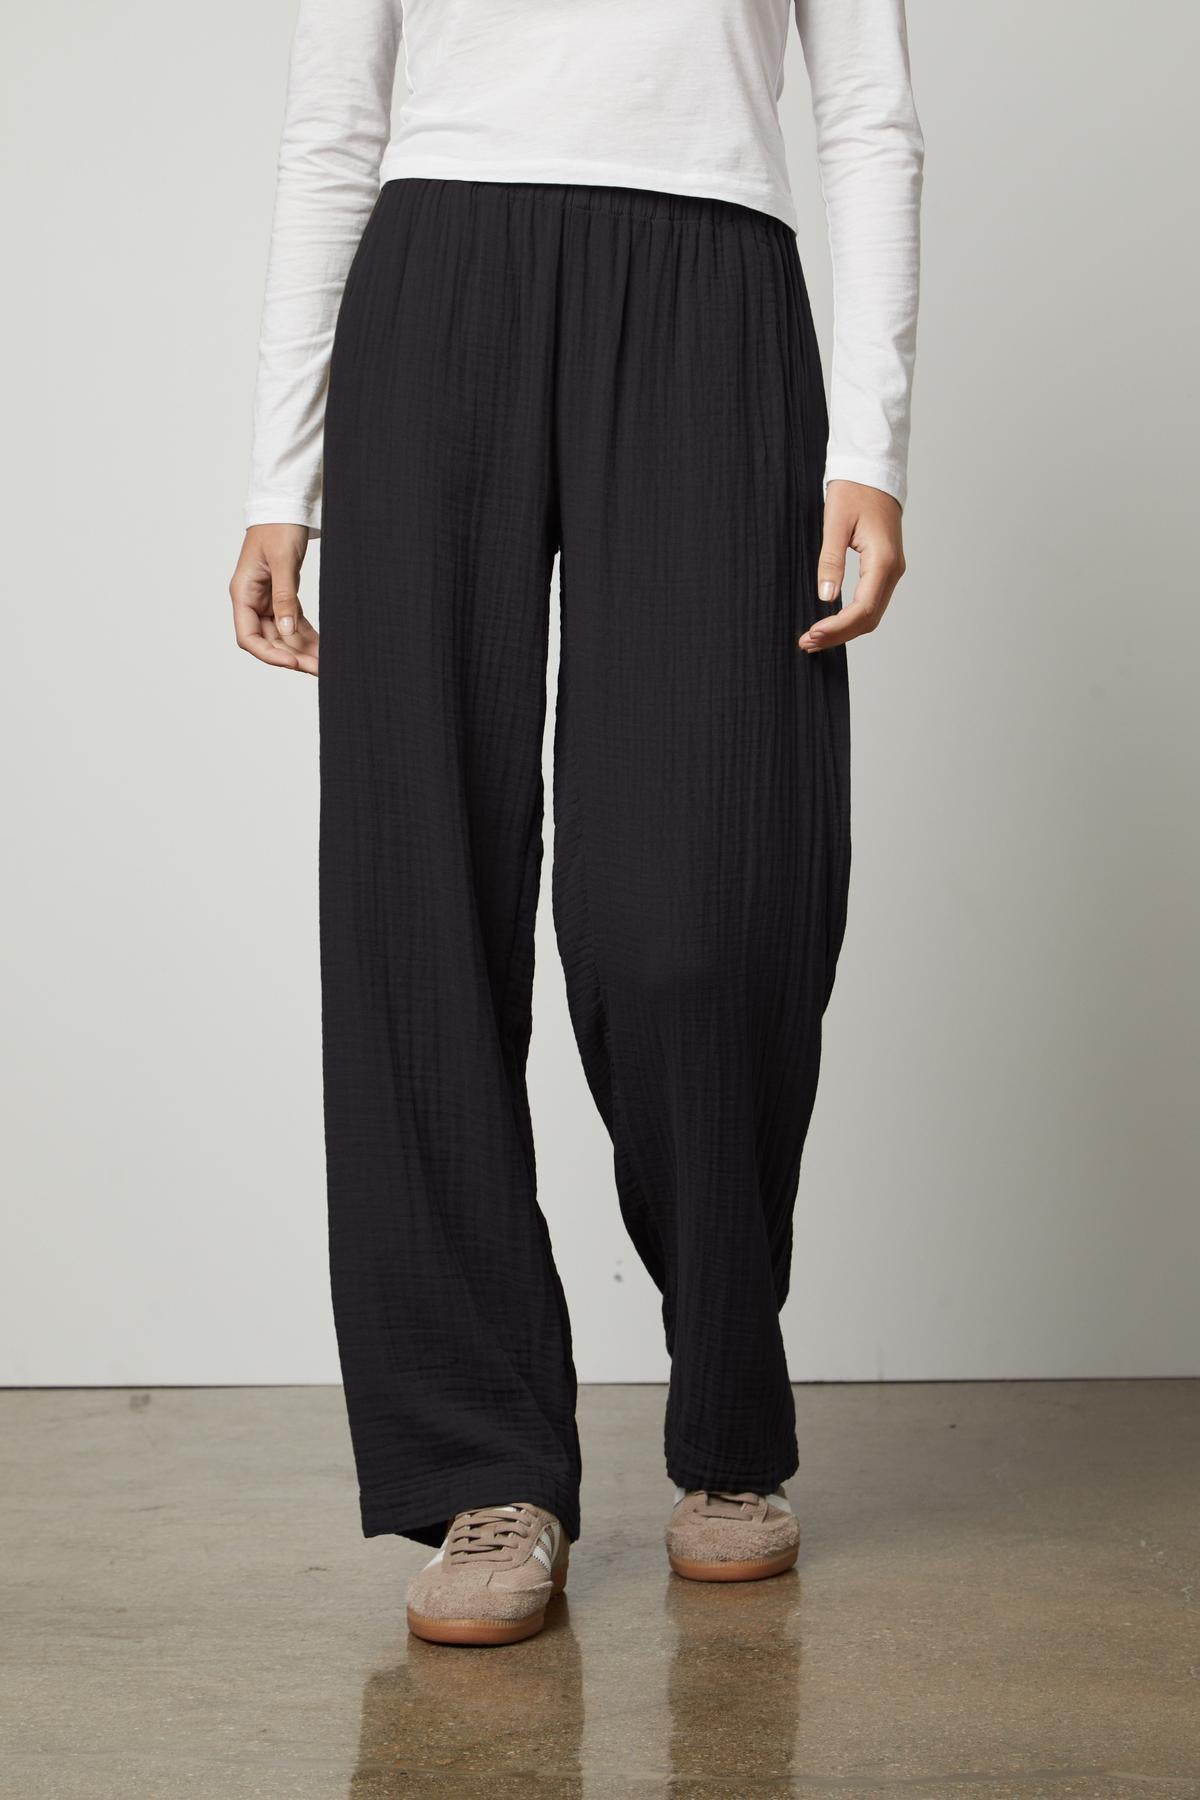   A woman wearing Velvet by Graham & Spencer black straight leg pants with an elastic waistband and a white t-shirt. 